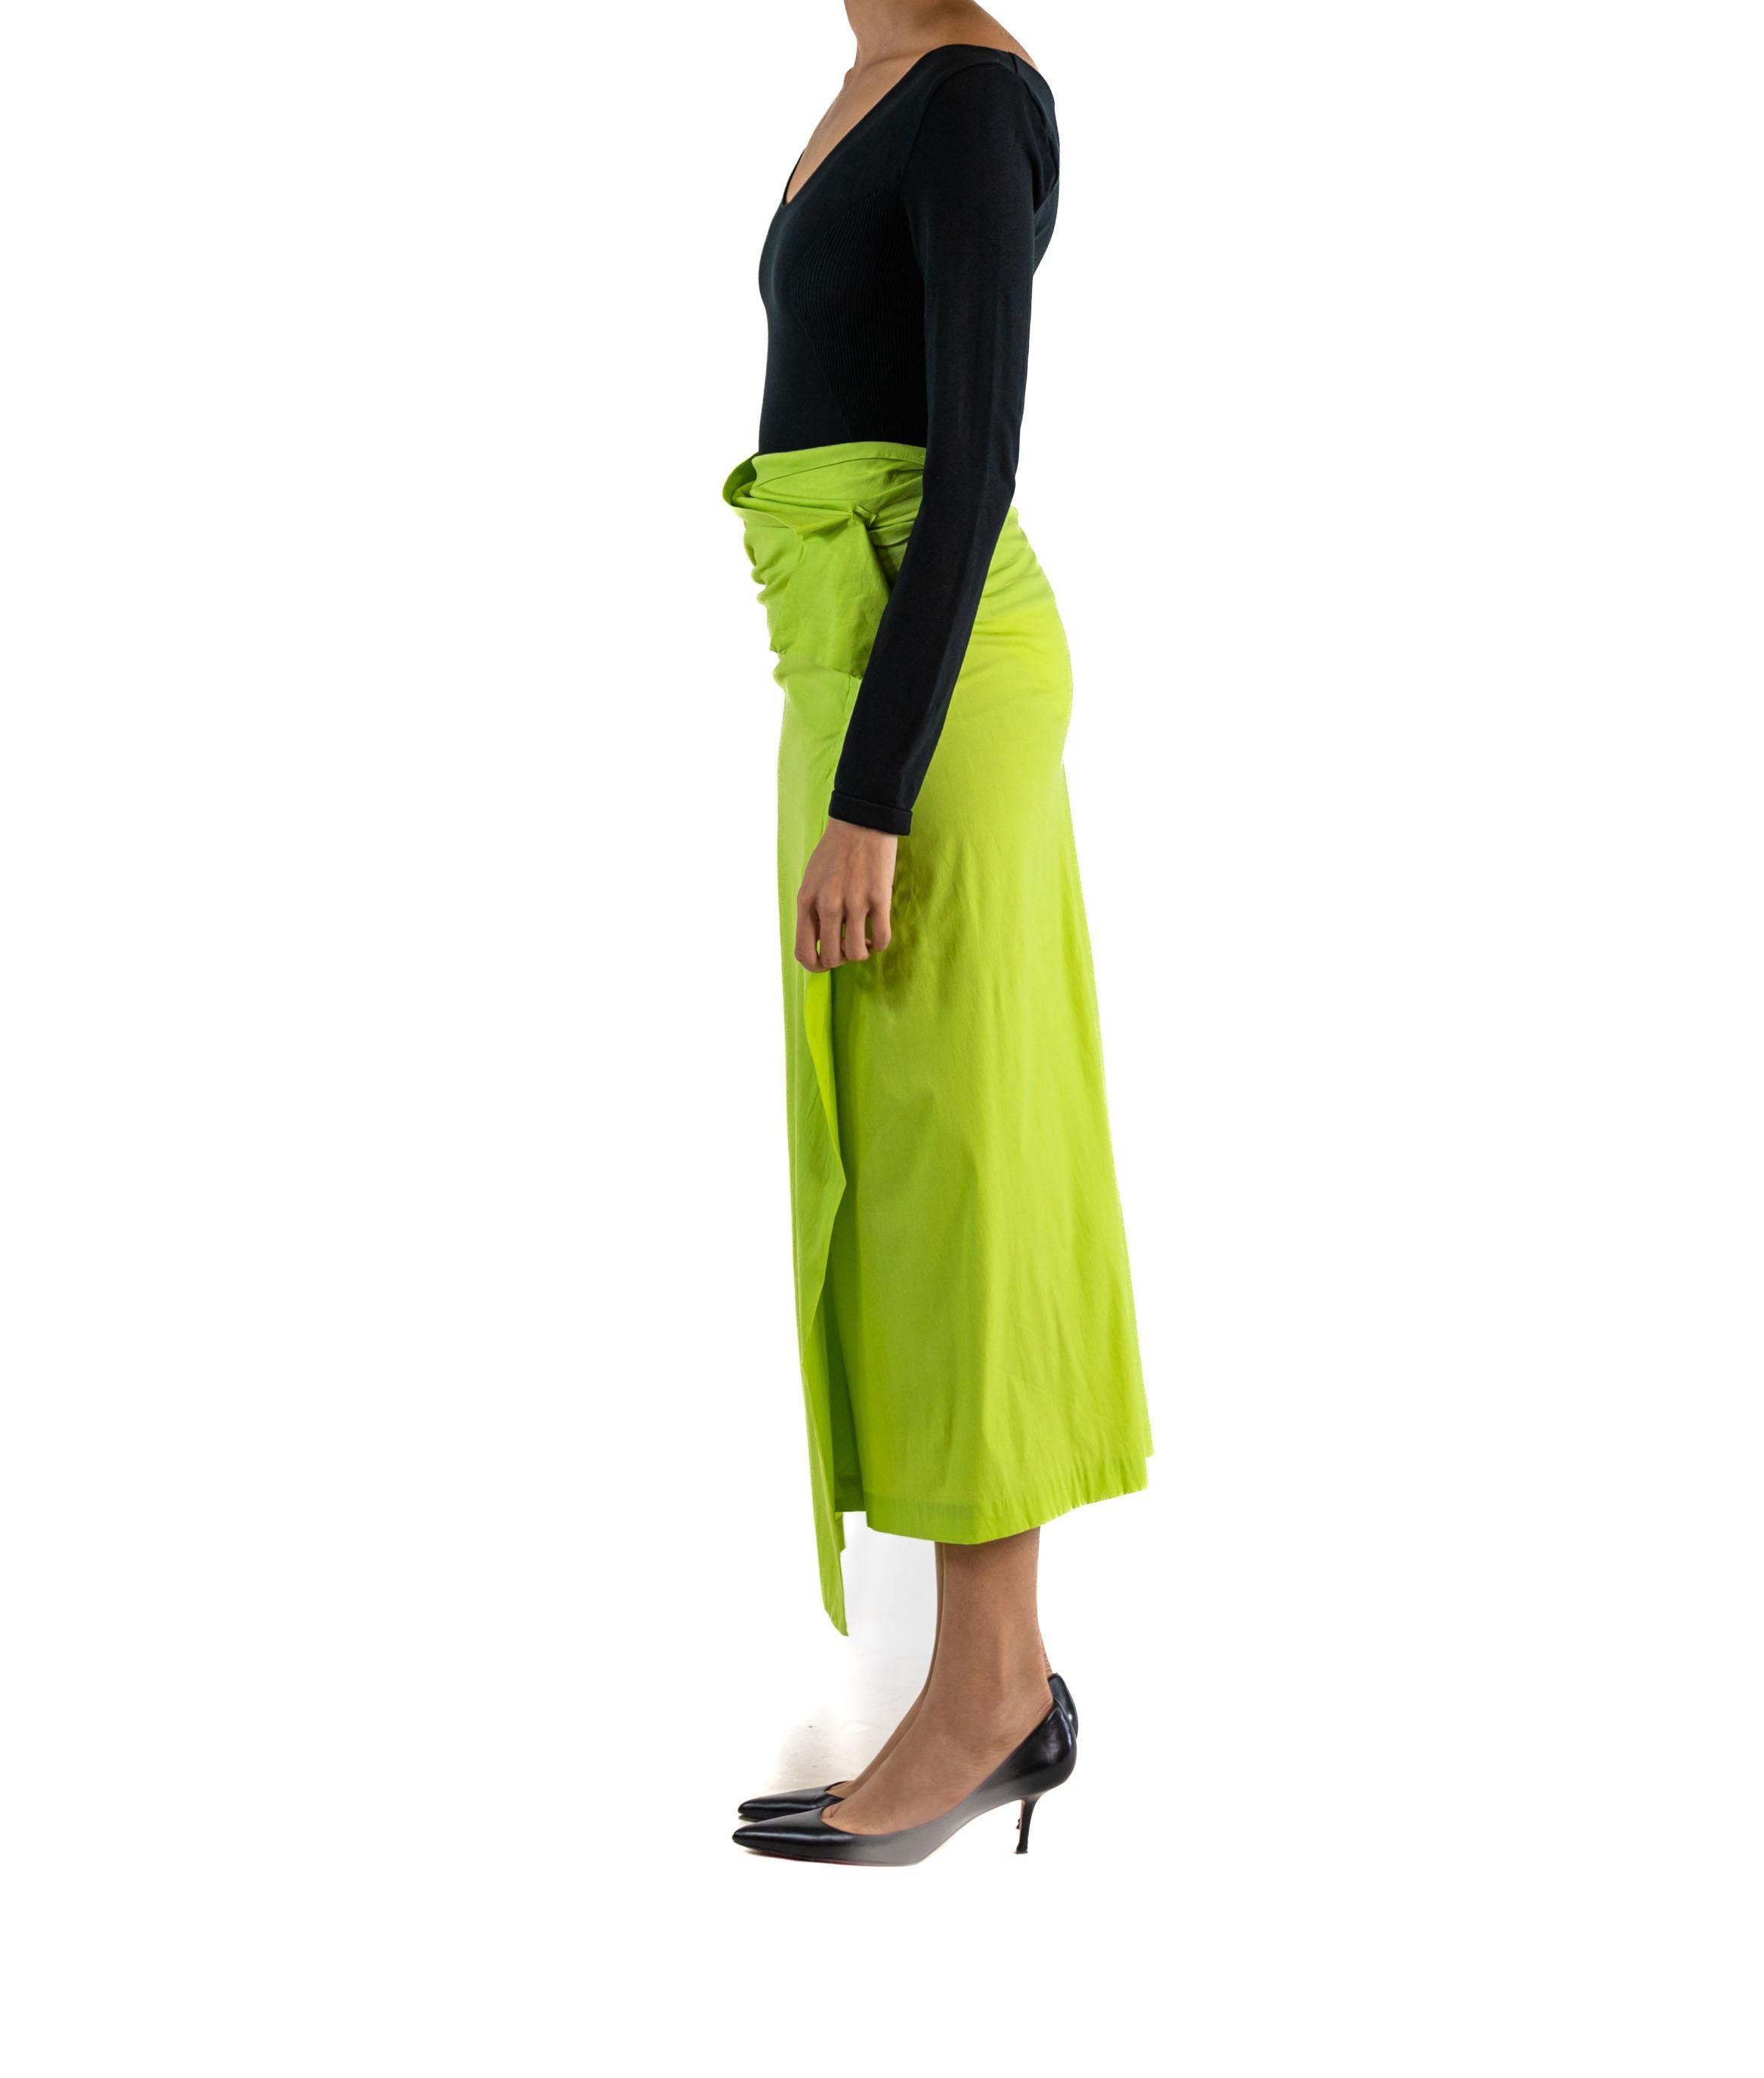 Women's or Men's 1990S ISSEY MIYAKE Lime Green & Black Rayon Blend Scoop Neck Top Skirt Ensemble For Sale